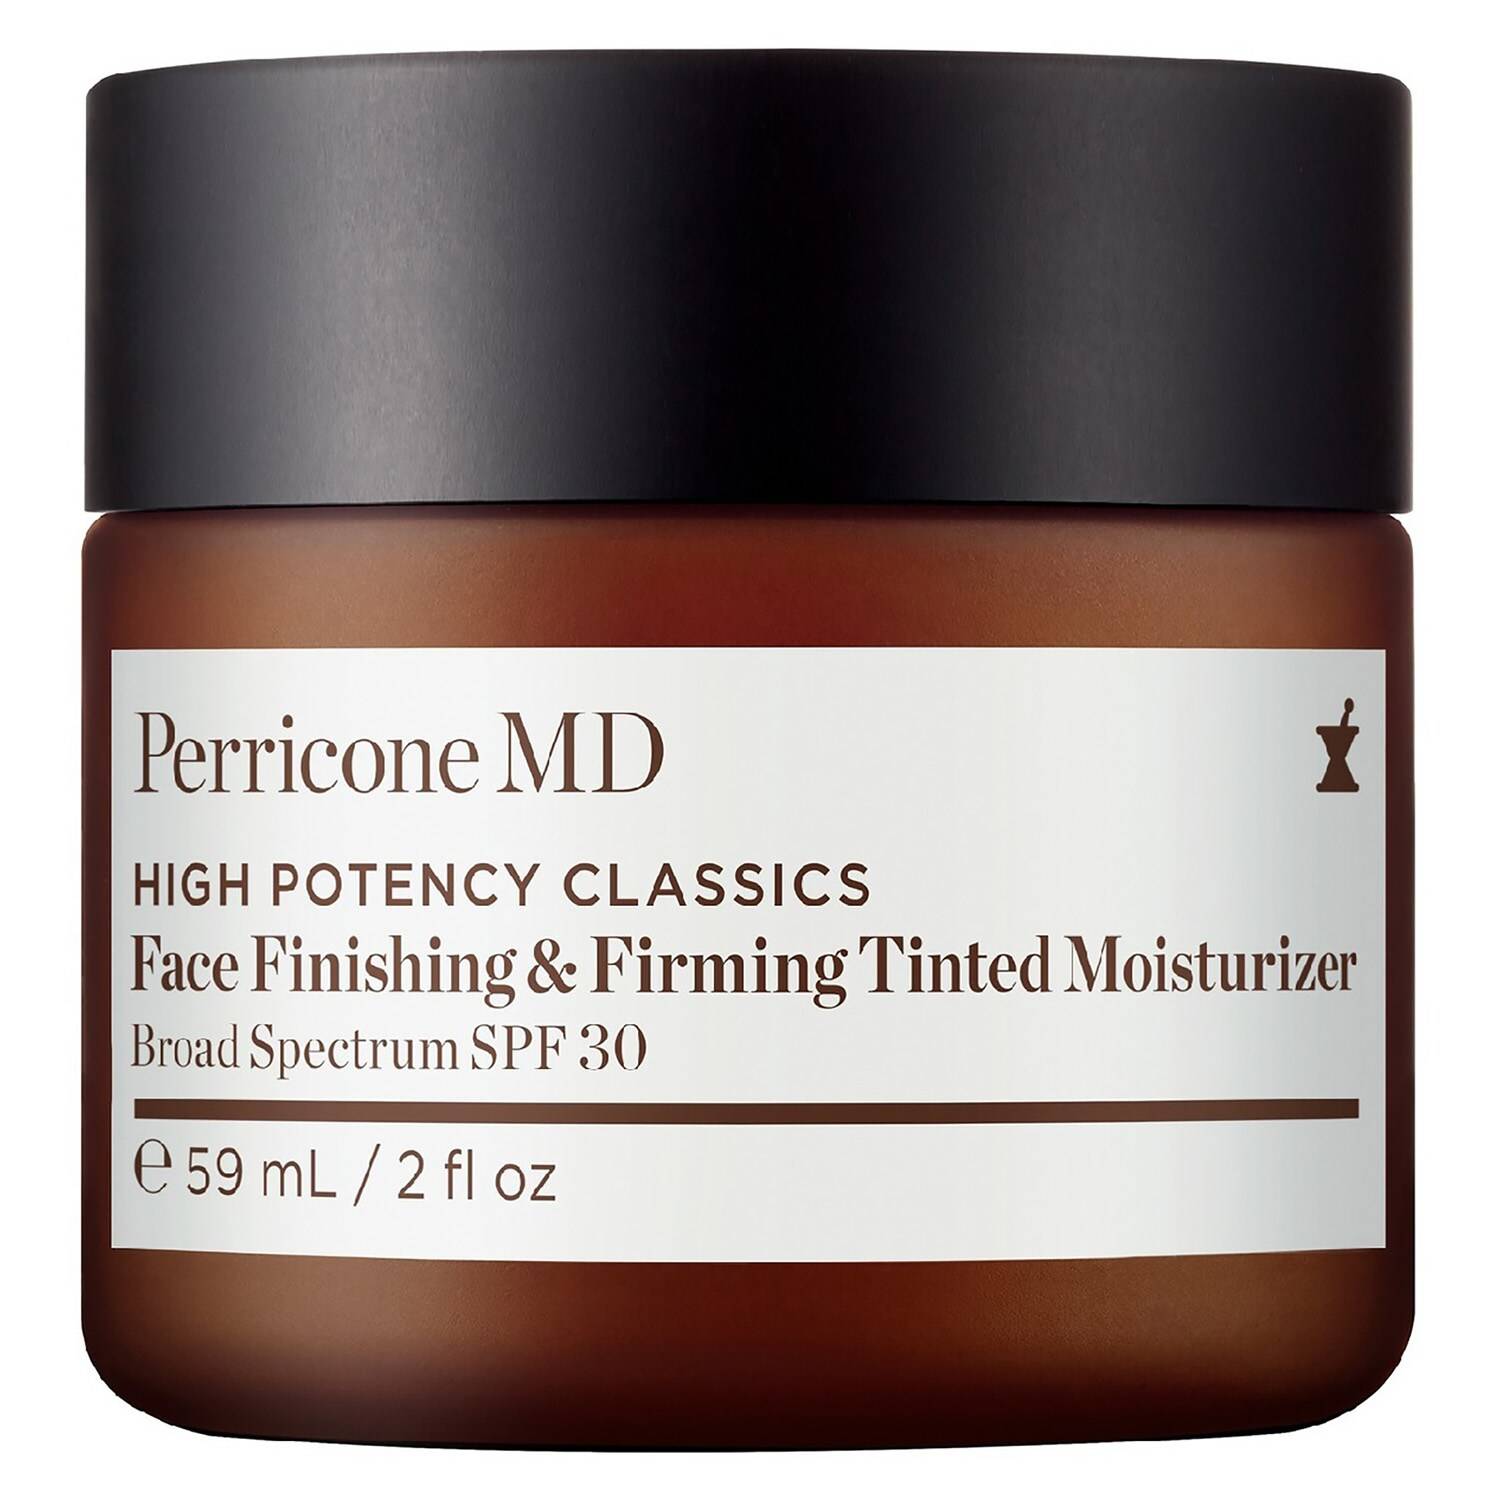 Perricone Md High Potency Classics Face Finishing & Firming Tinted Moisturizer Broad Spectrum Spf30 